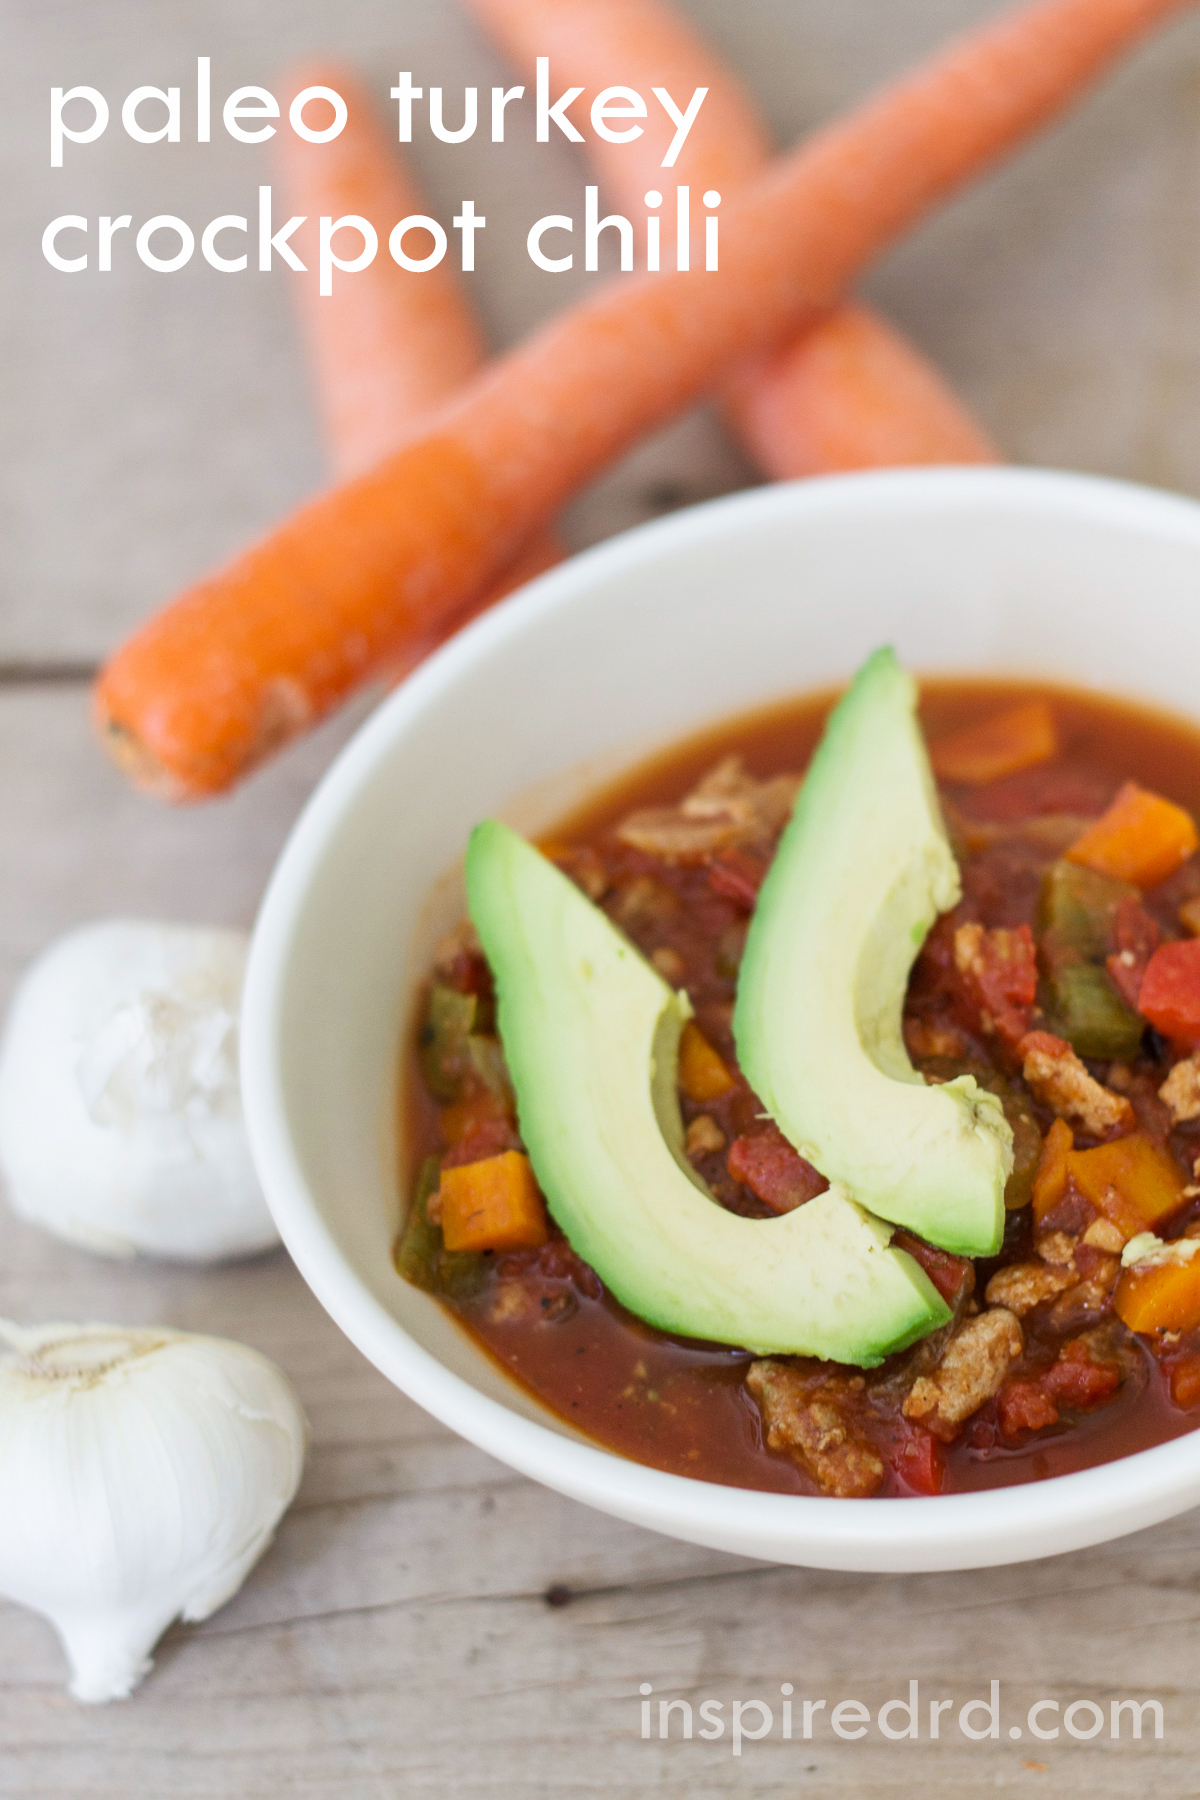 This paleo chili turkey is so easy! Throw in the crockpot, and have it waiting for you after a busy day. Gluten-free!